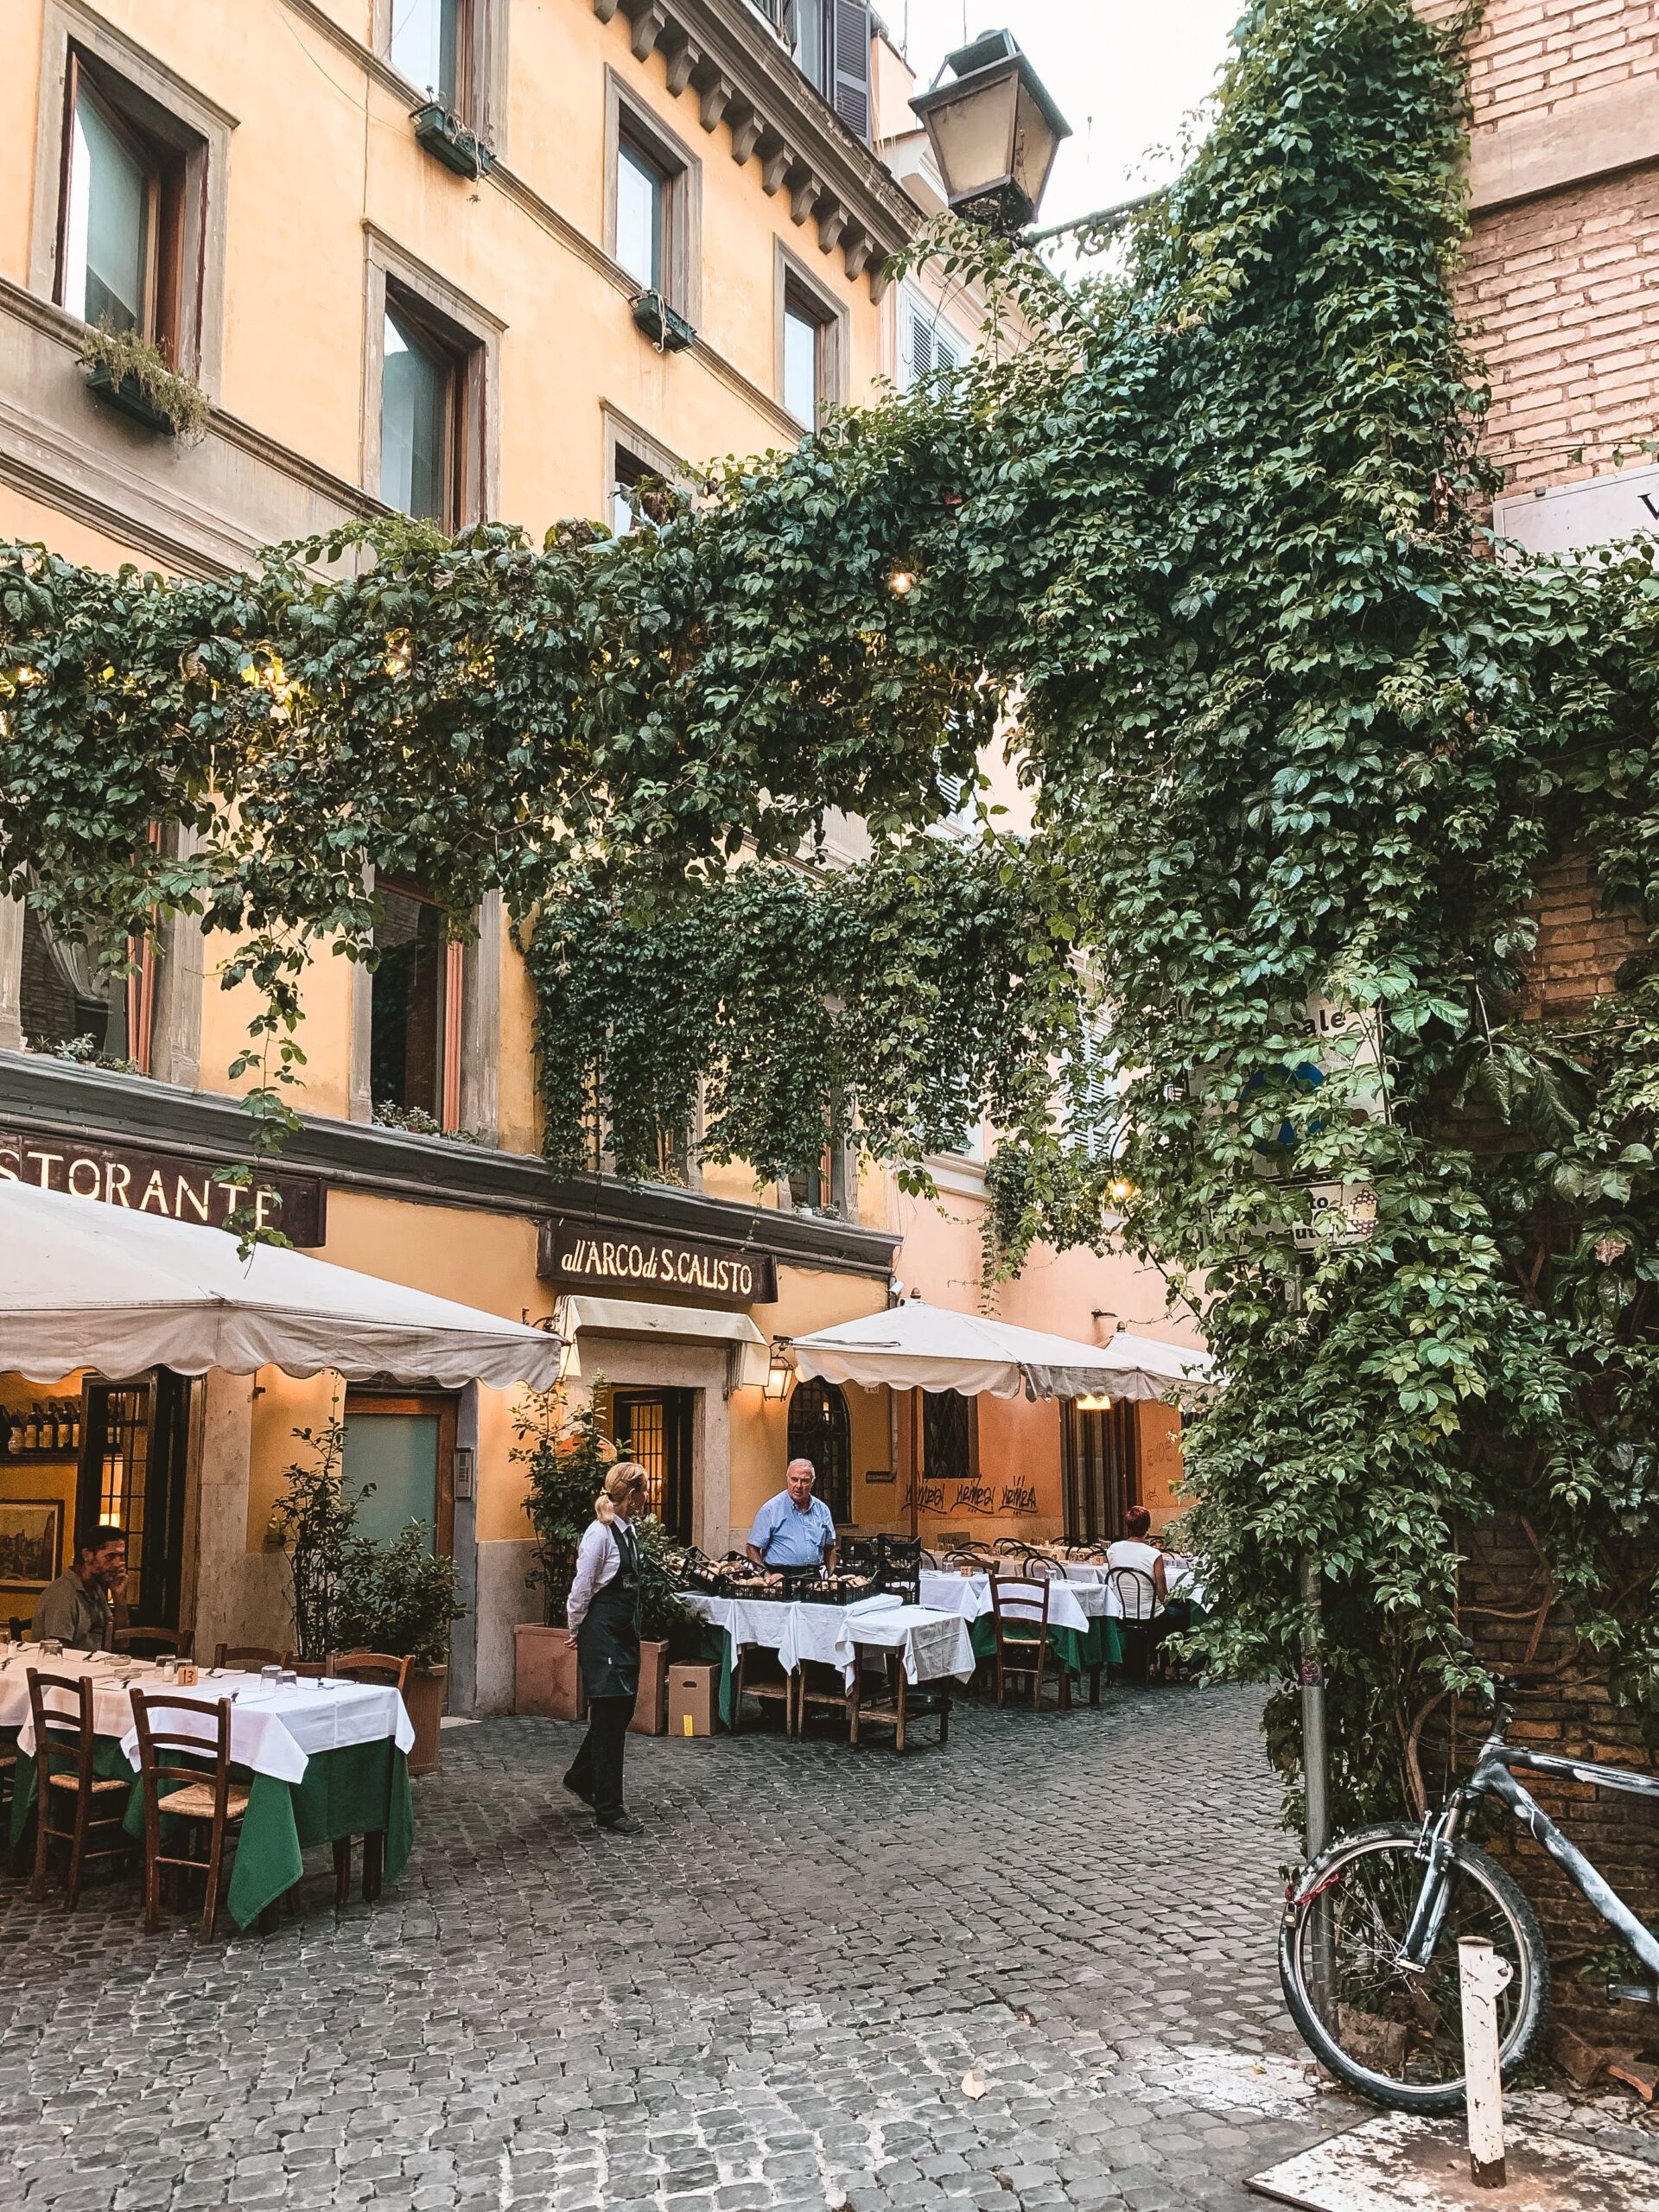 Top reasons to visit Rome